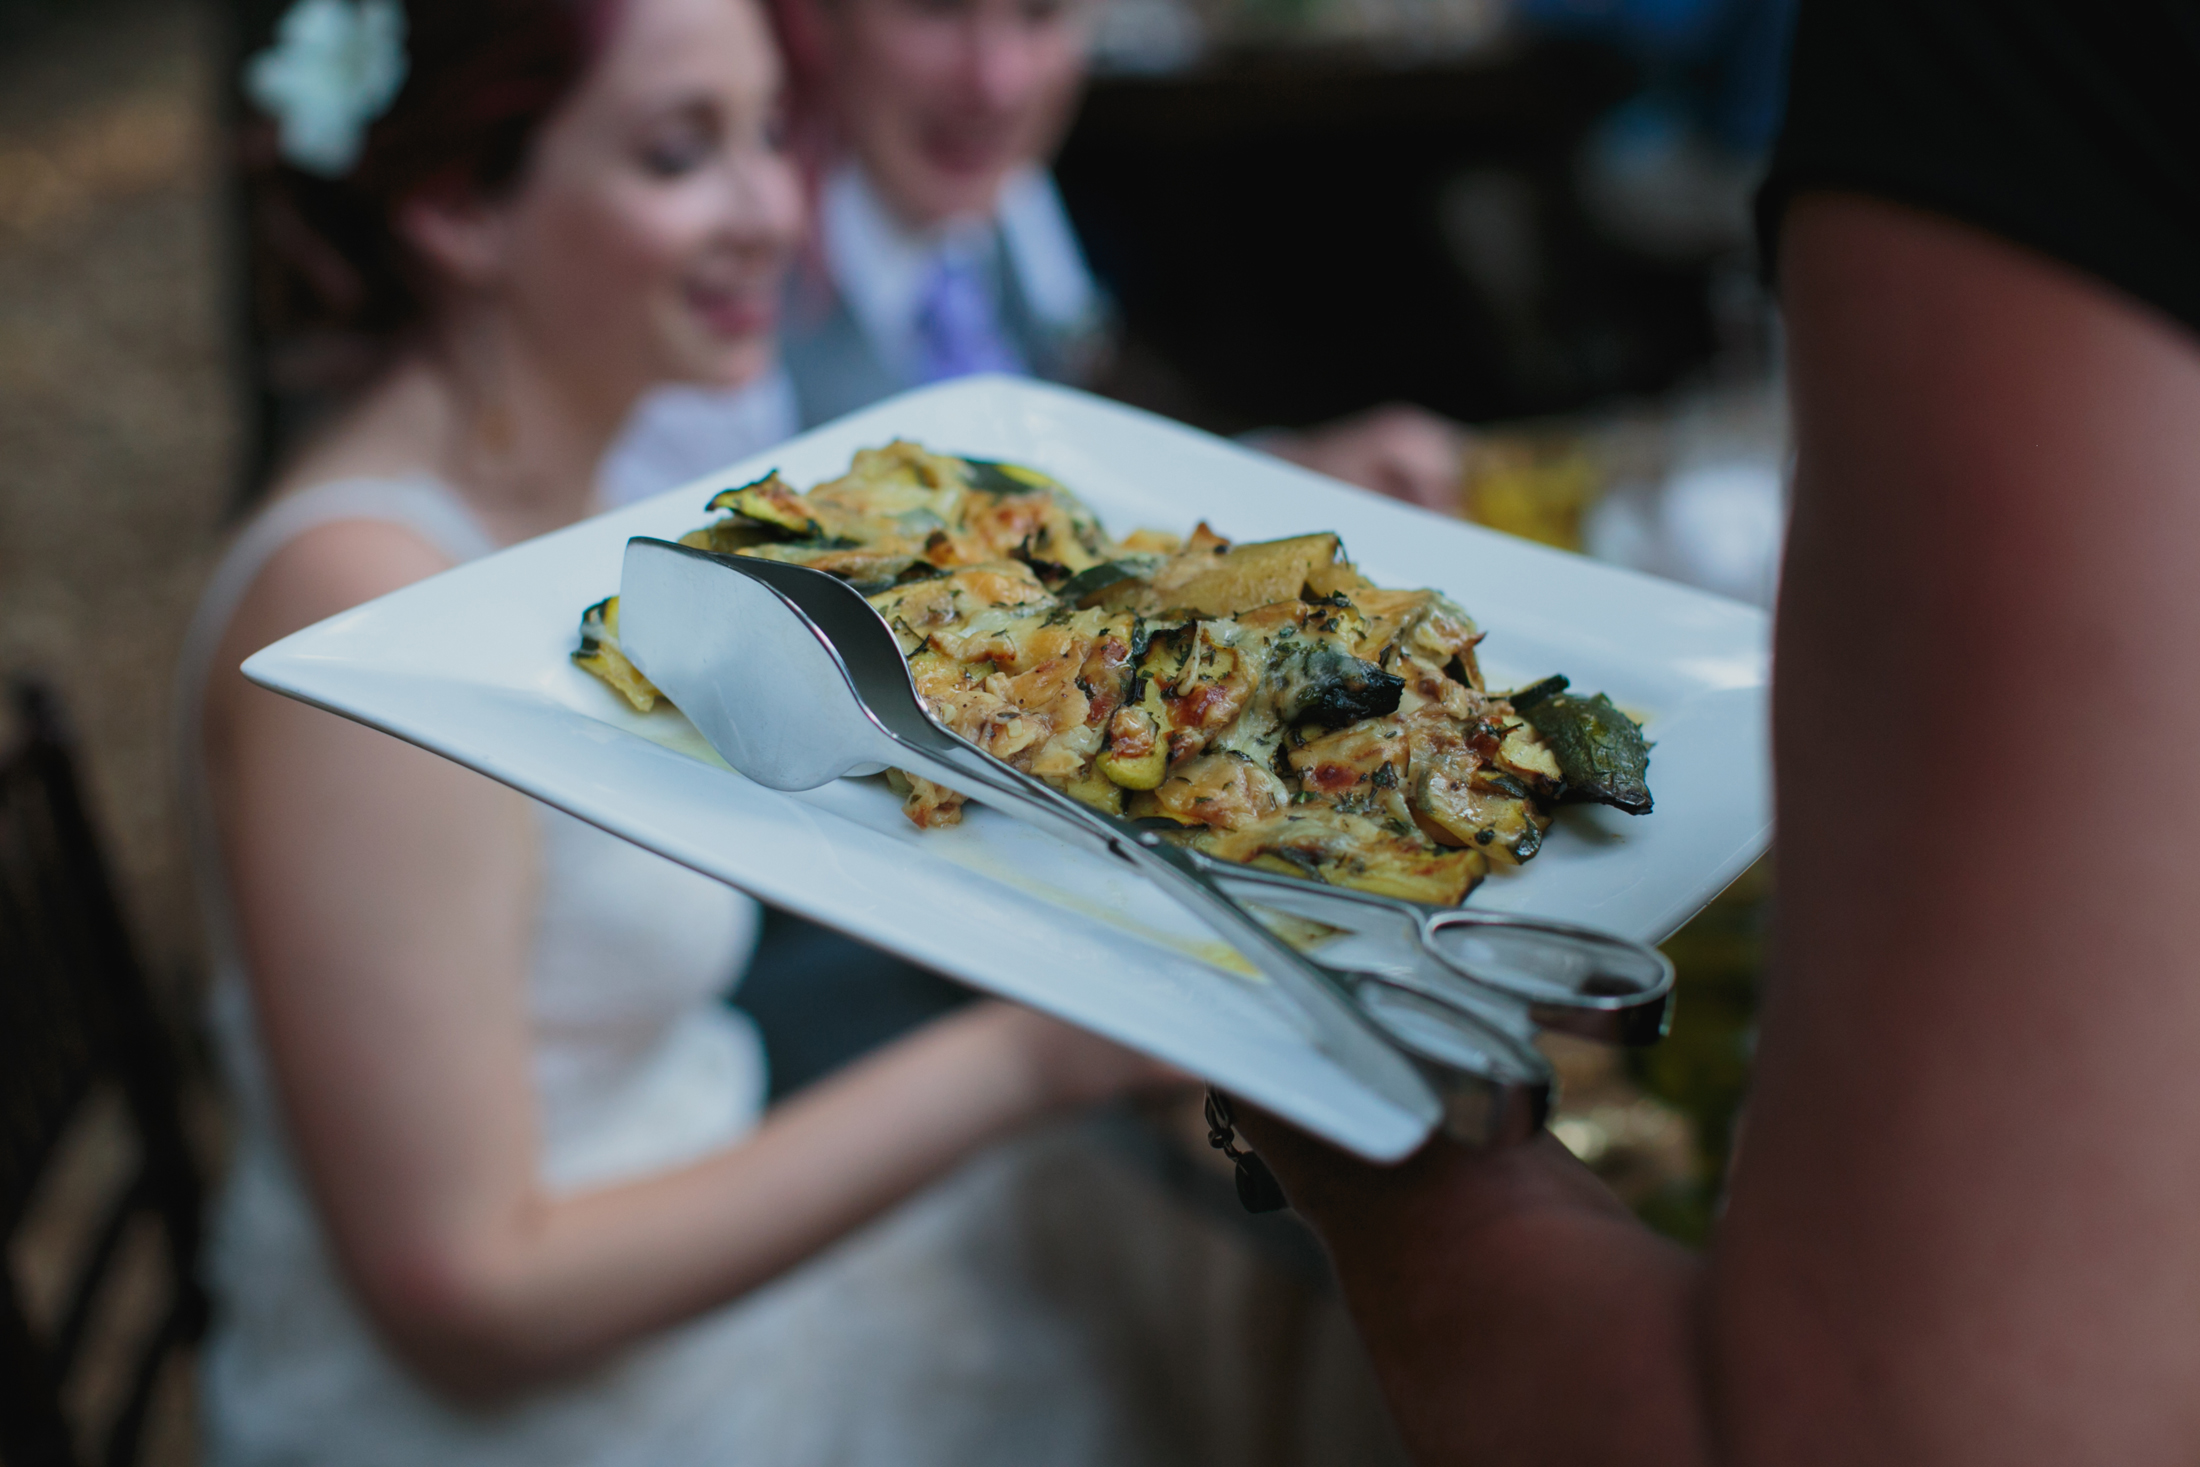 A plate of food is being served with a smiling bride in the background.